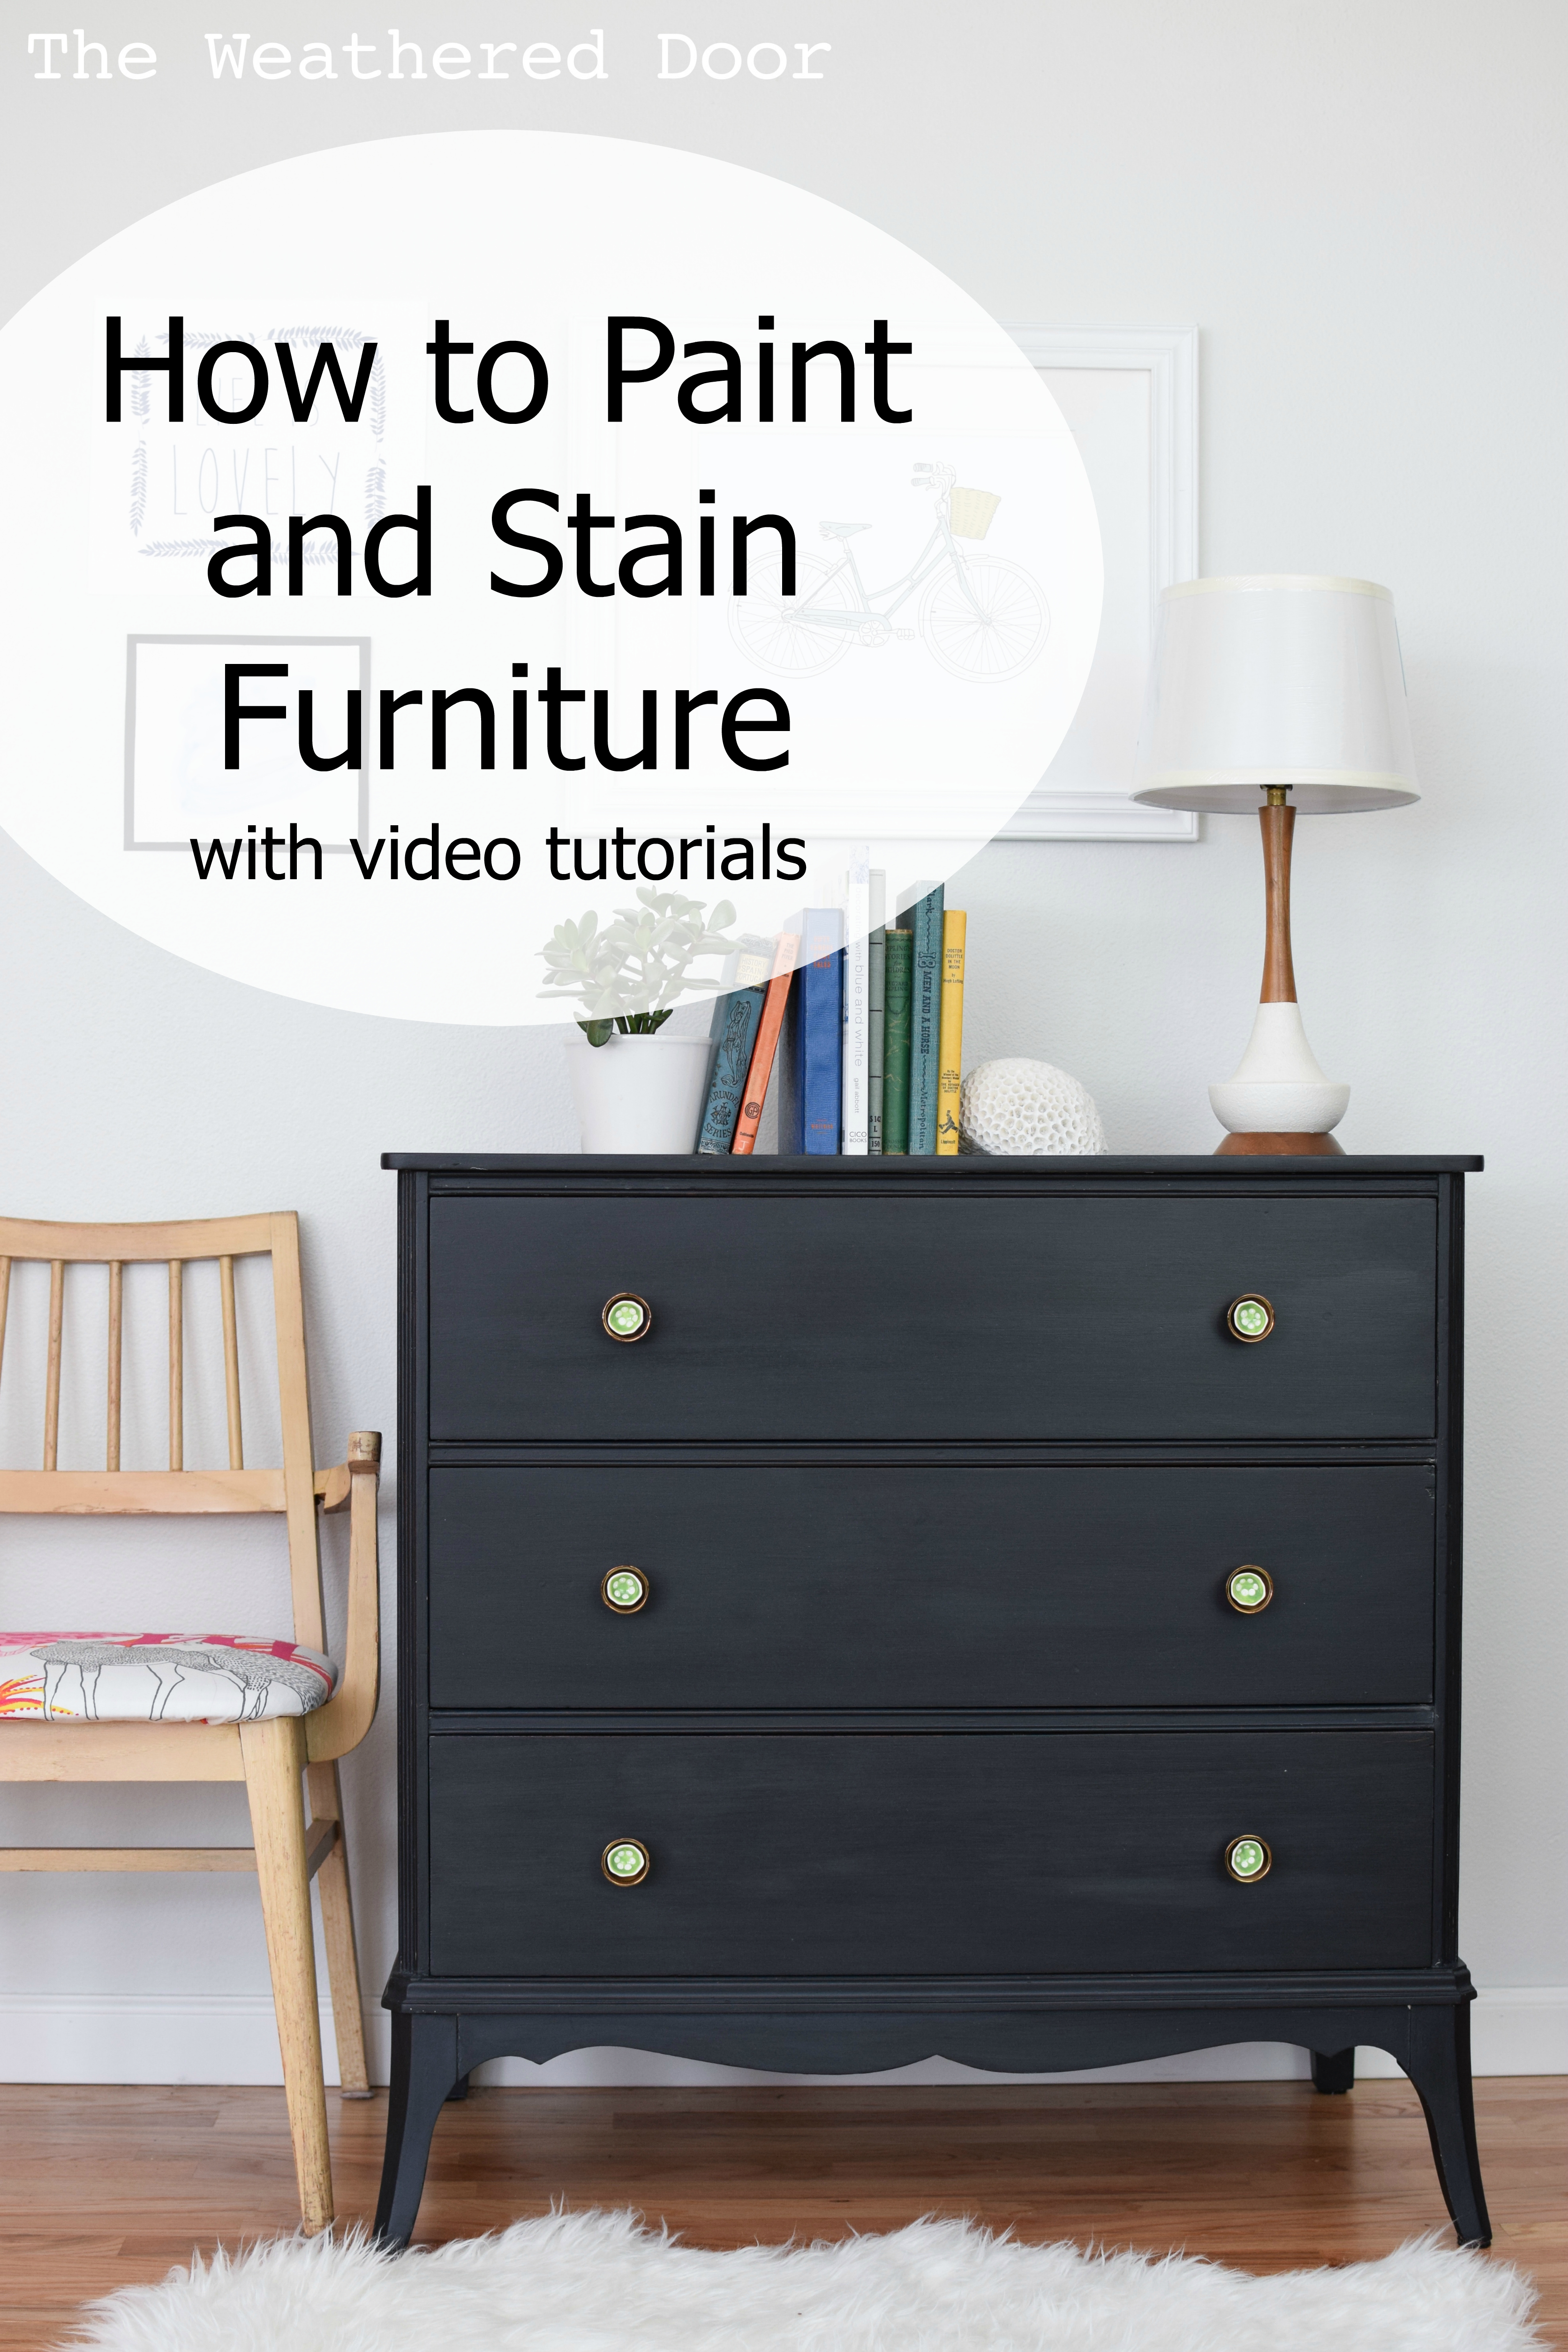 How to Paint and Stain Furniture Professionally with Video Tutorials